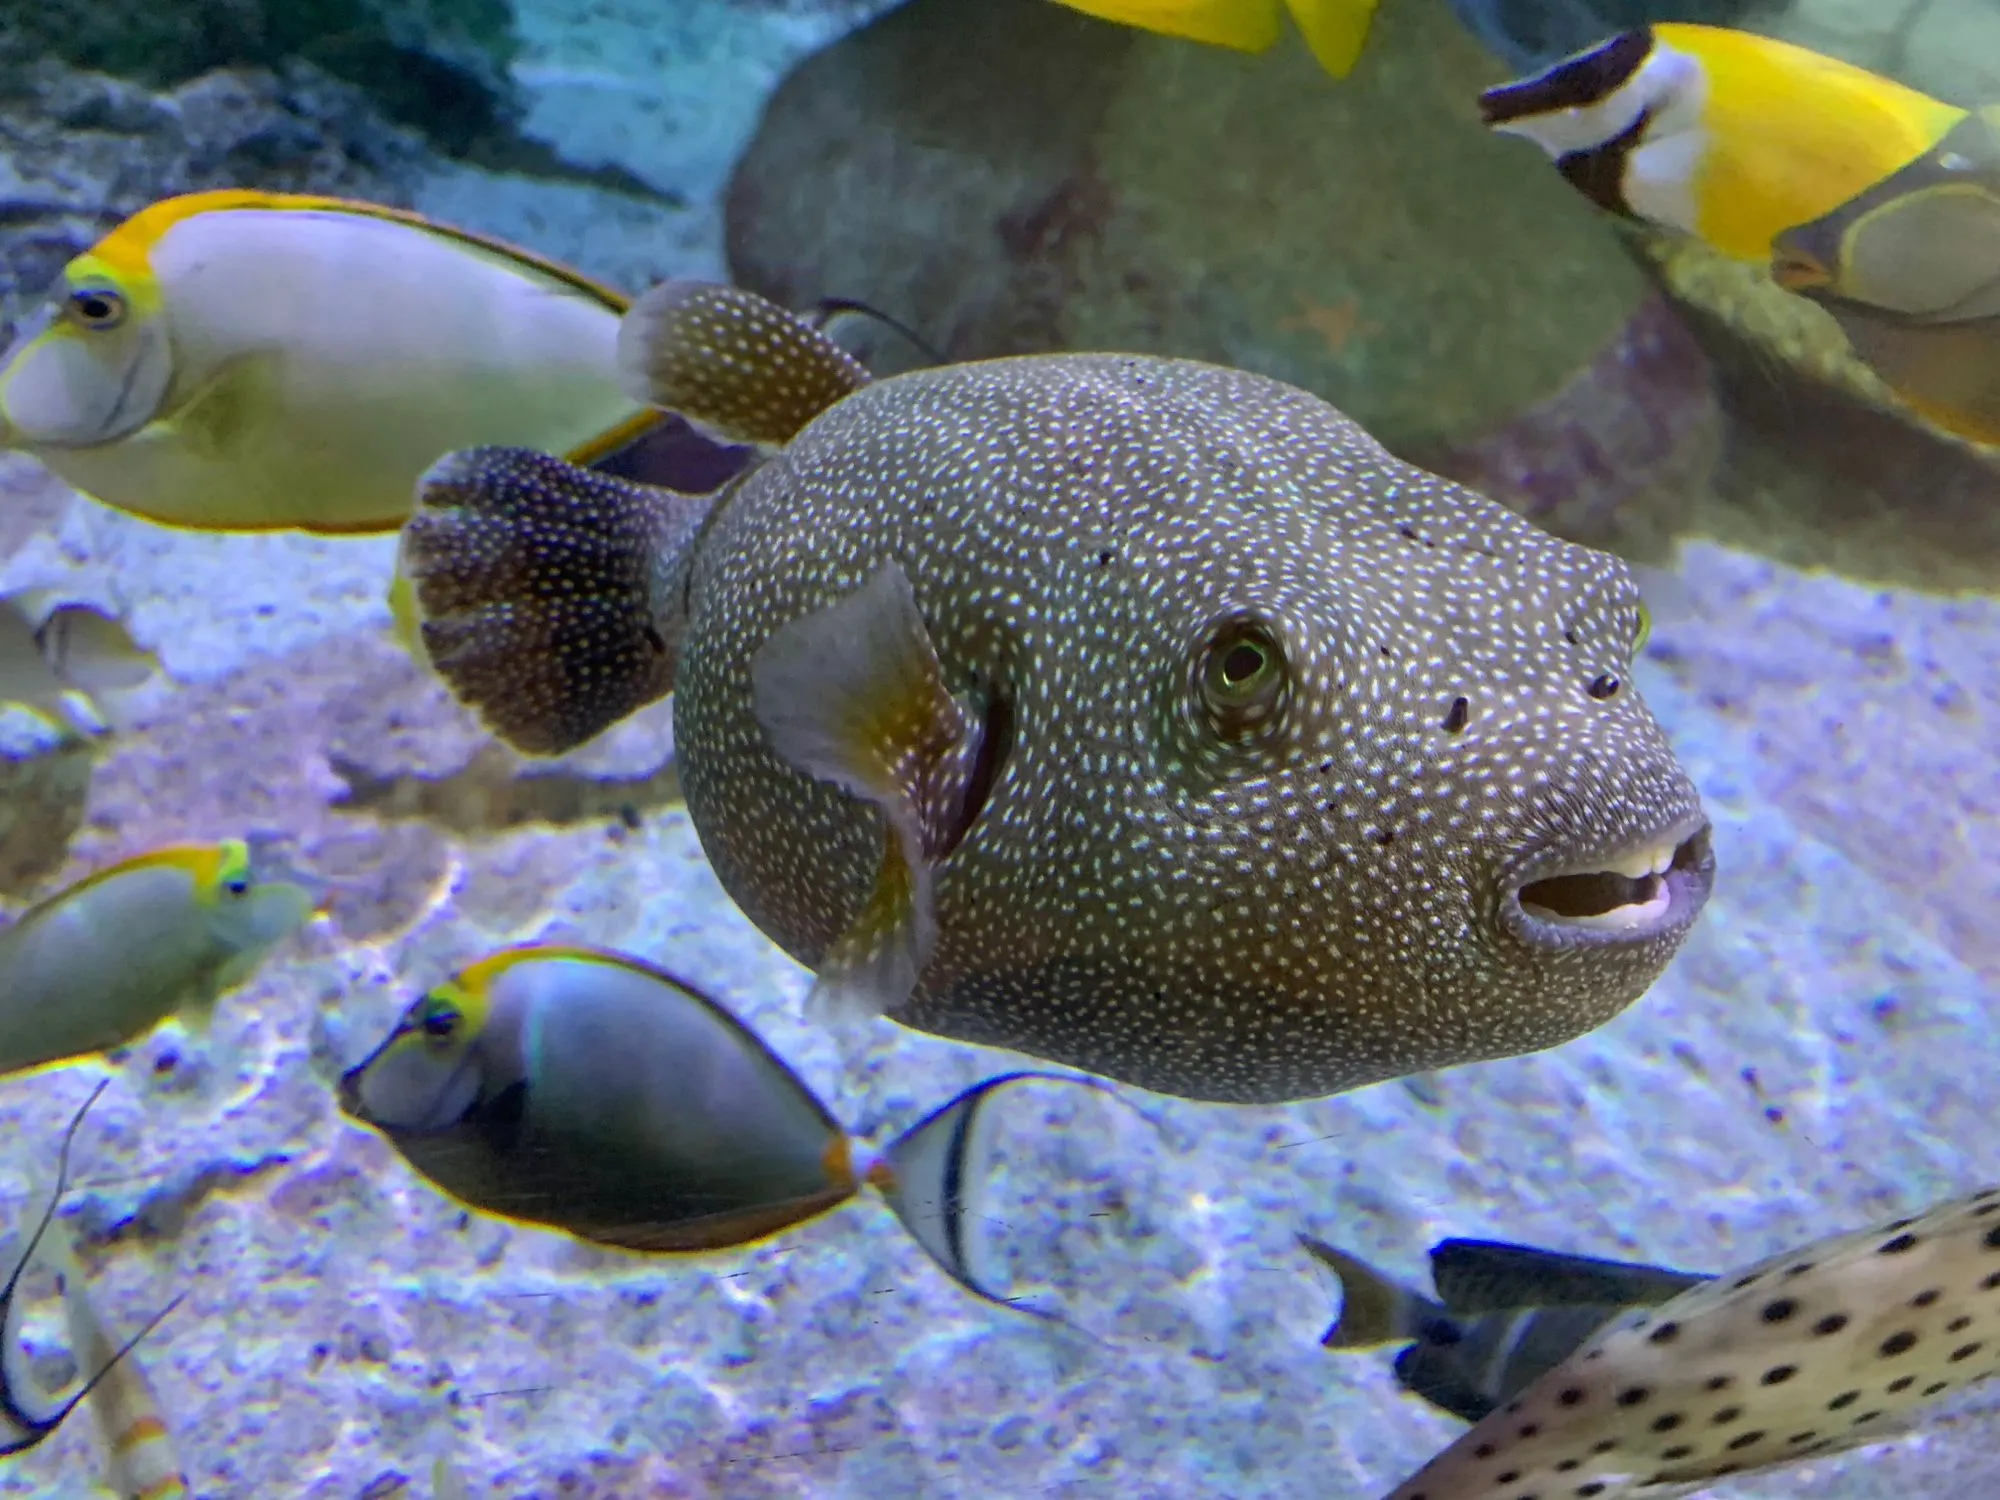 Amazing guineafowl puffer facts to learn more about this incredible fish.